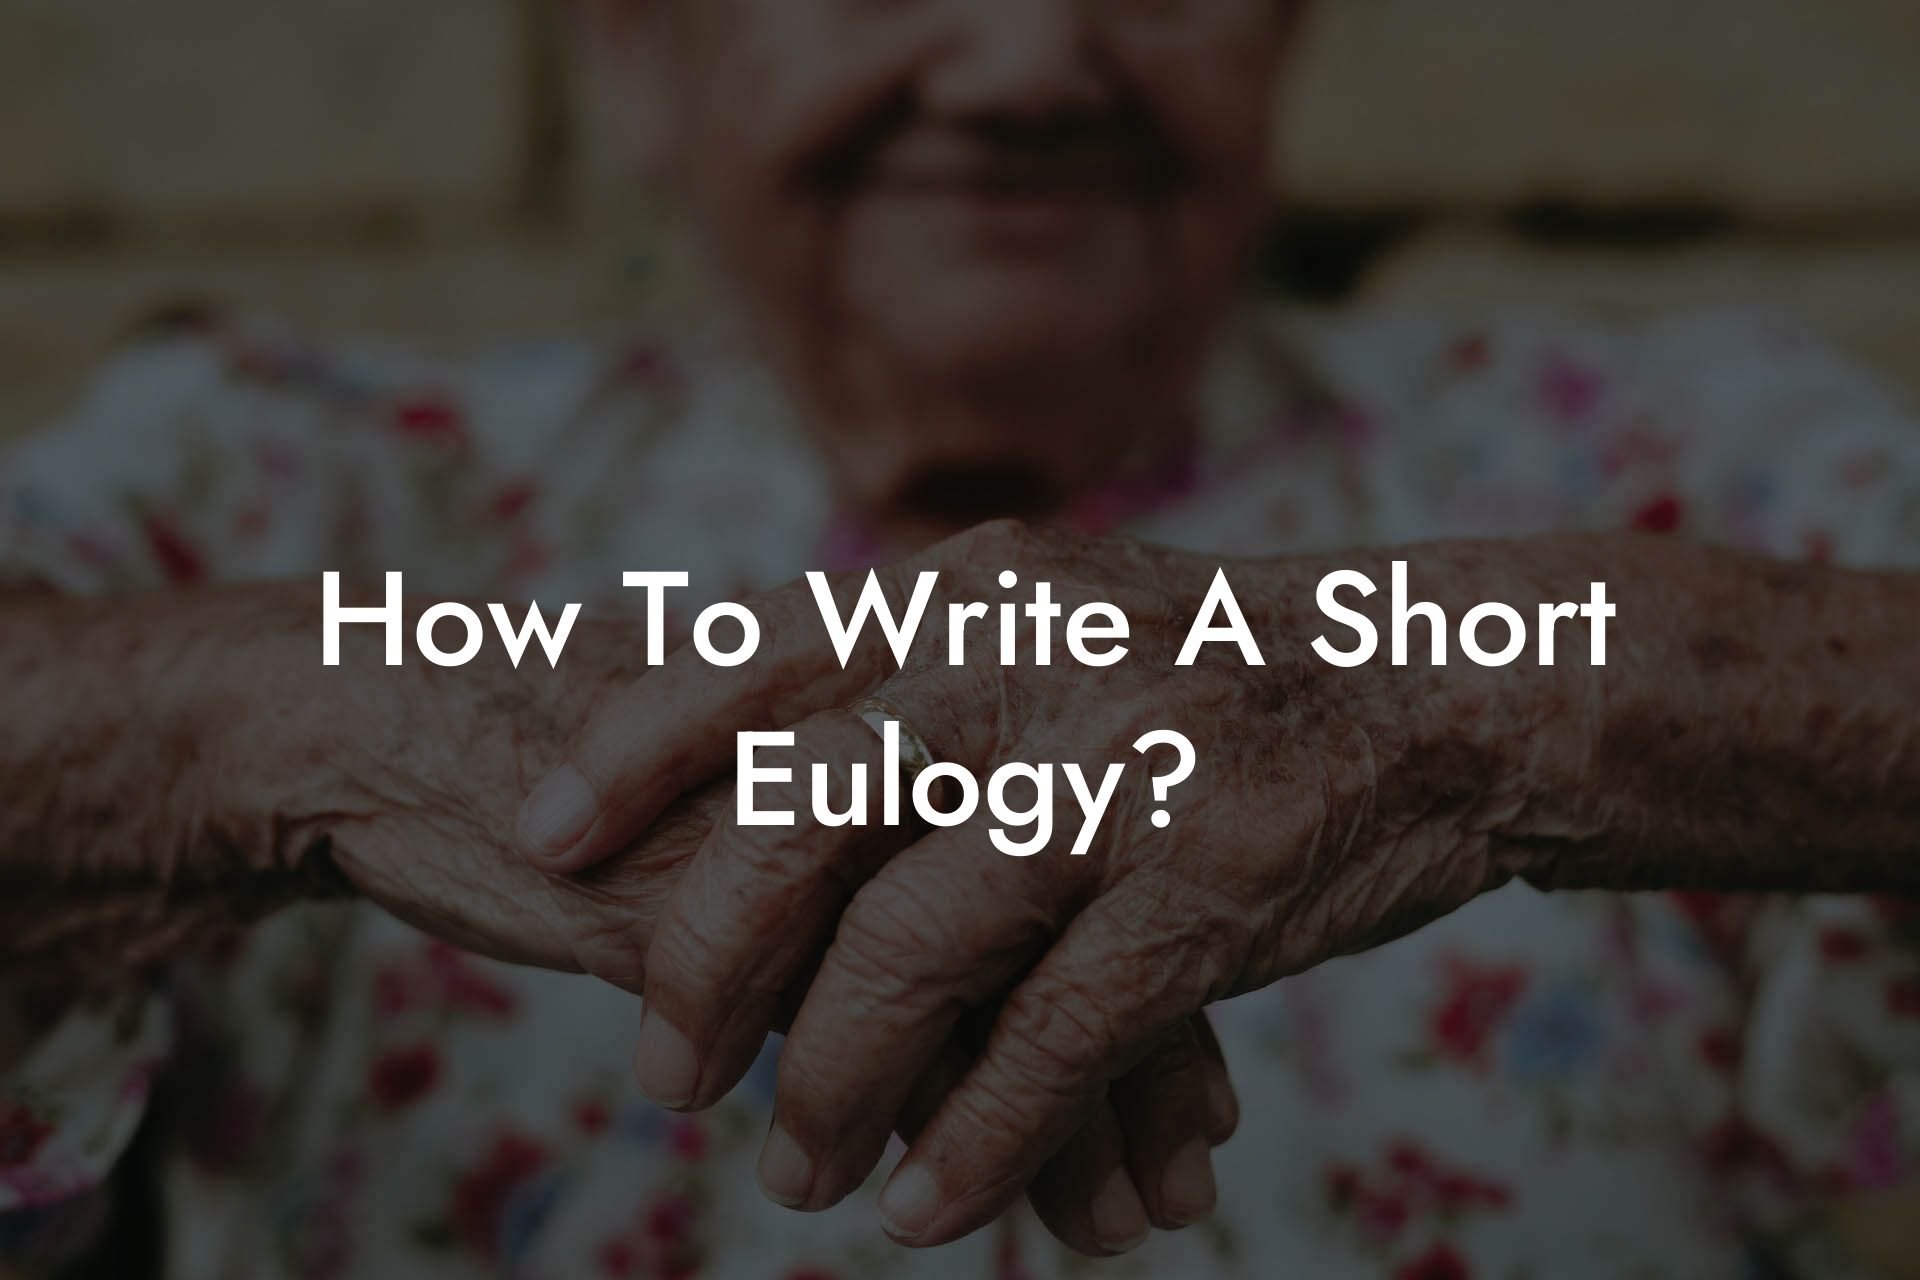 How To Write A Short Eulogy